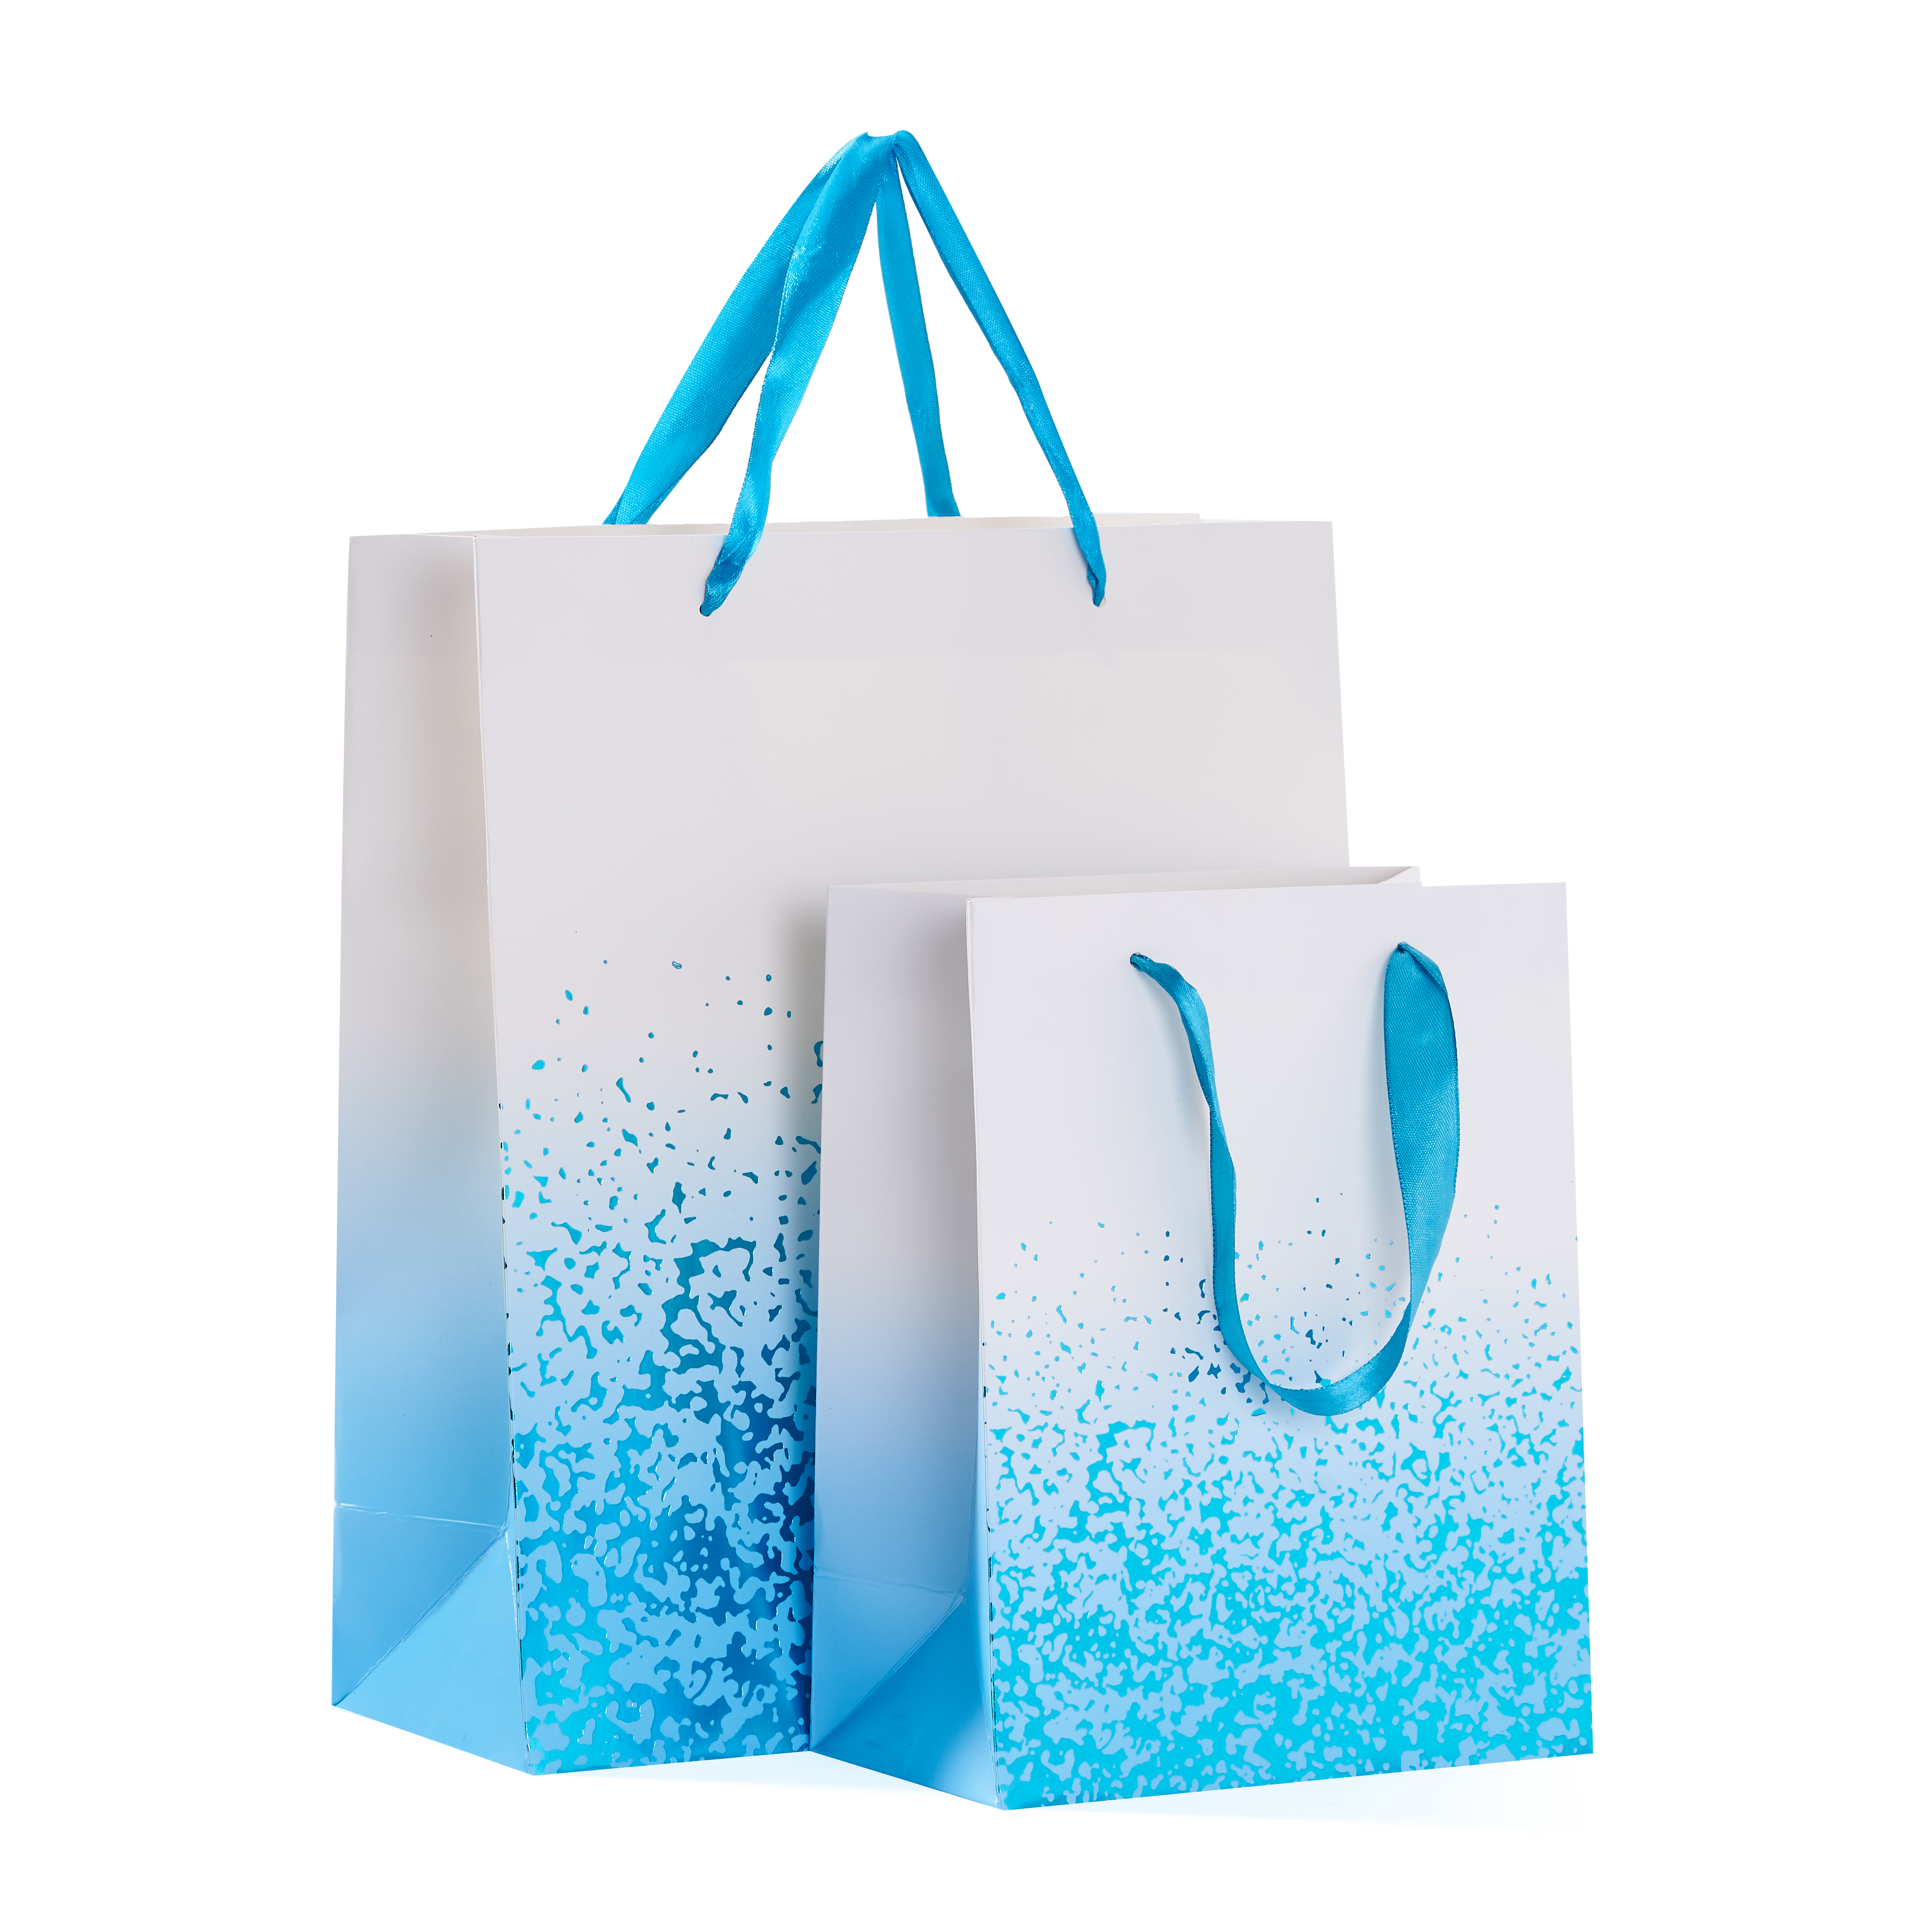 16 Coloured Gift Bags (2 Sizes)